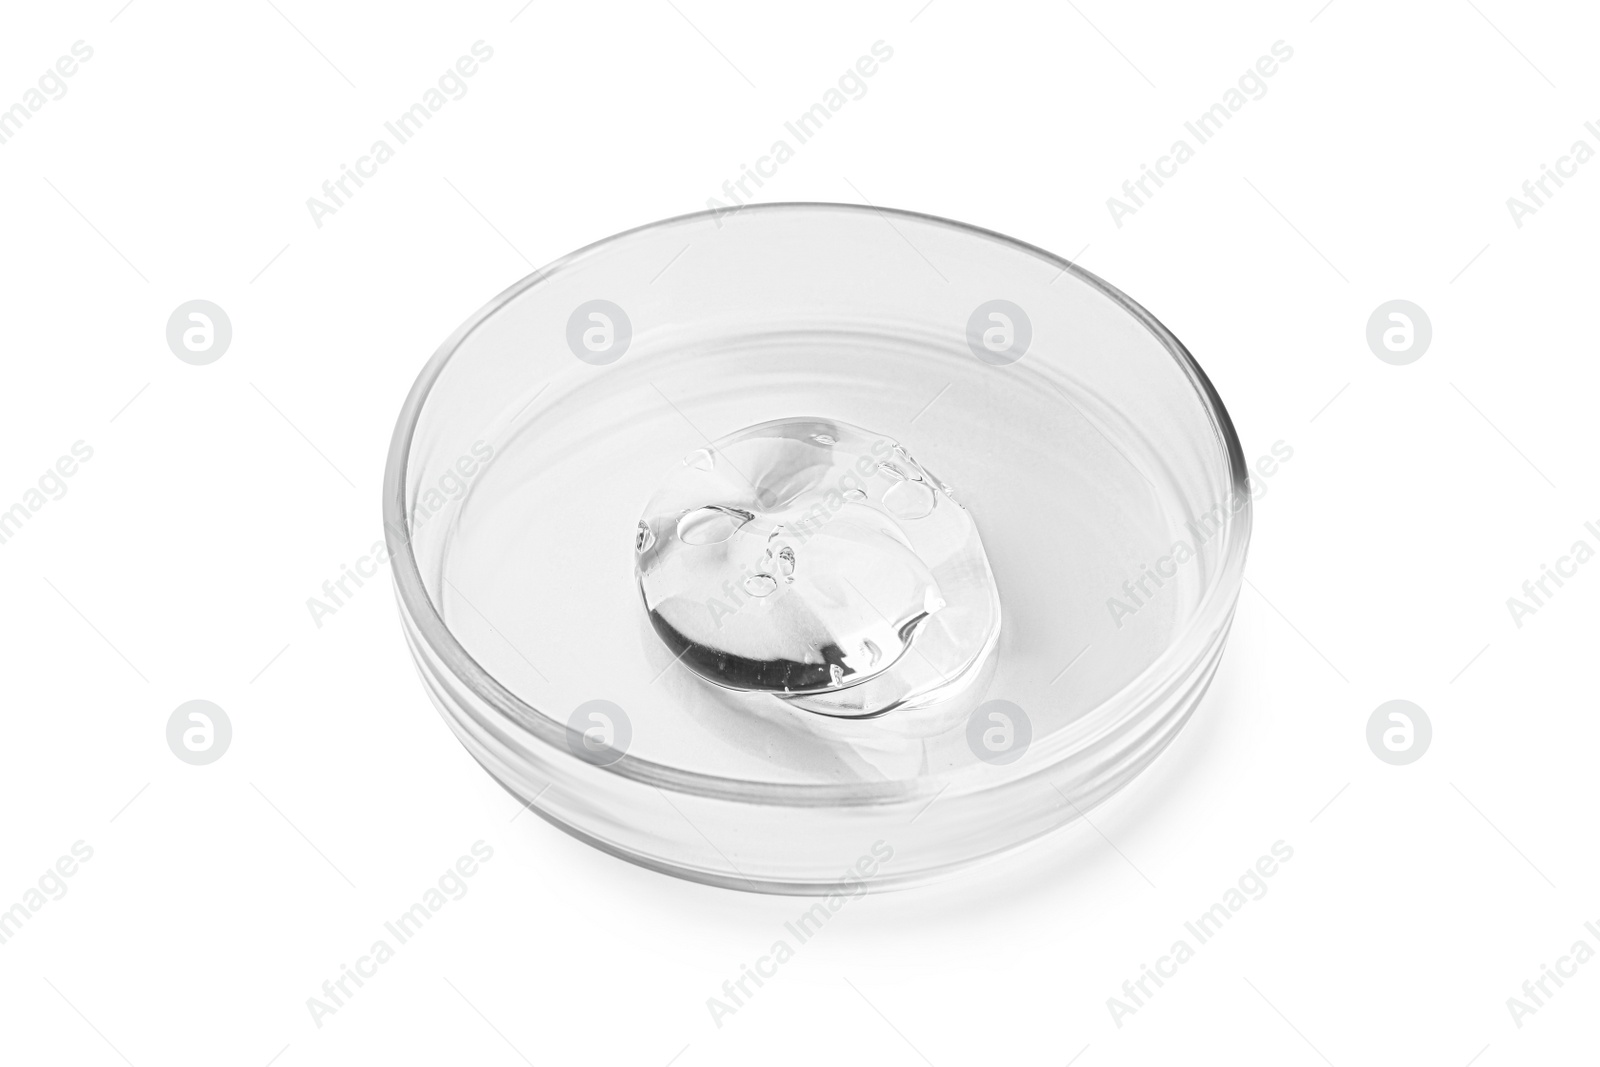 Photo of Petri dish with liquid isolated on white